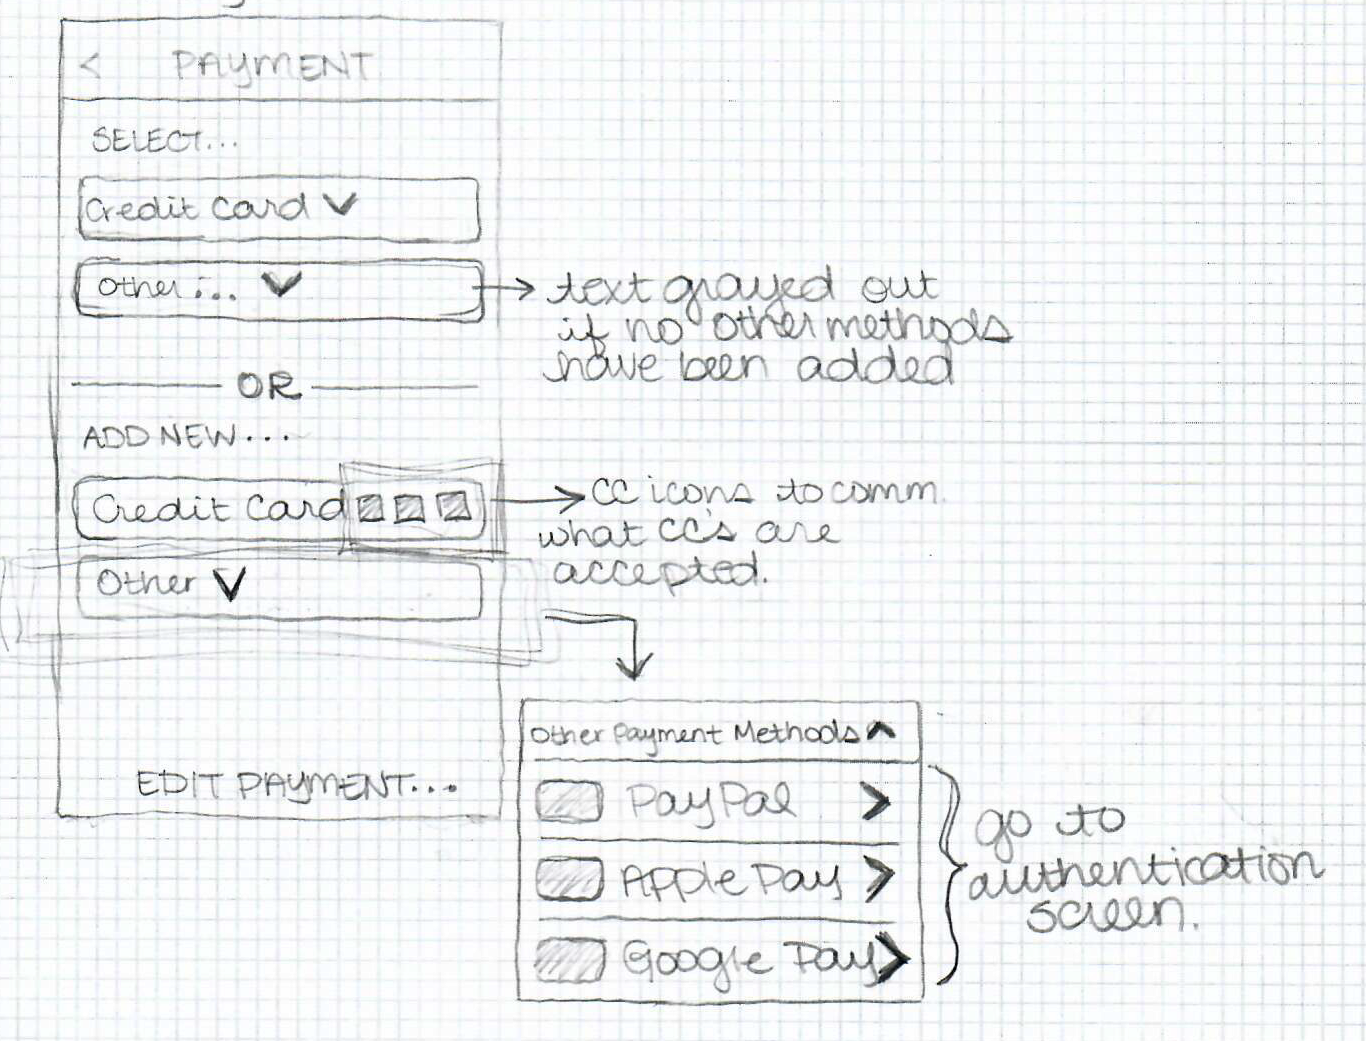 This is a sketch I made when brainstorming scalable payment screens.